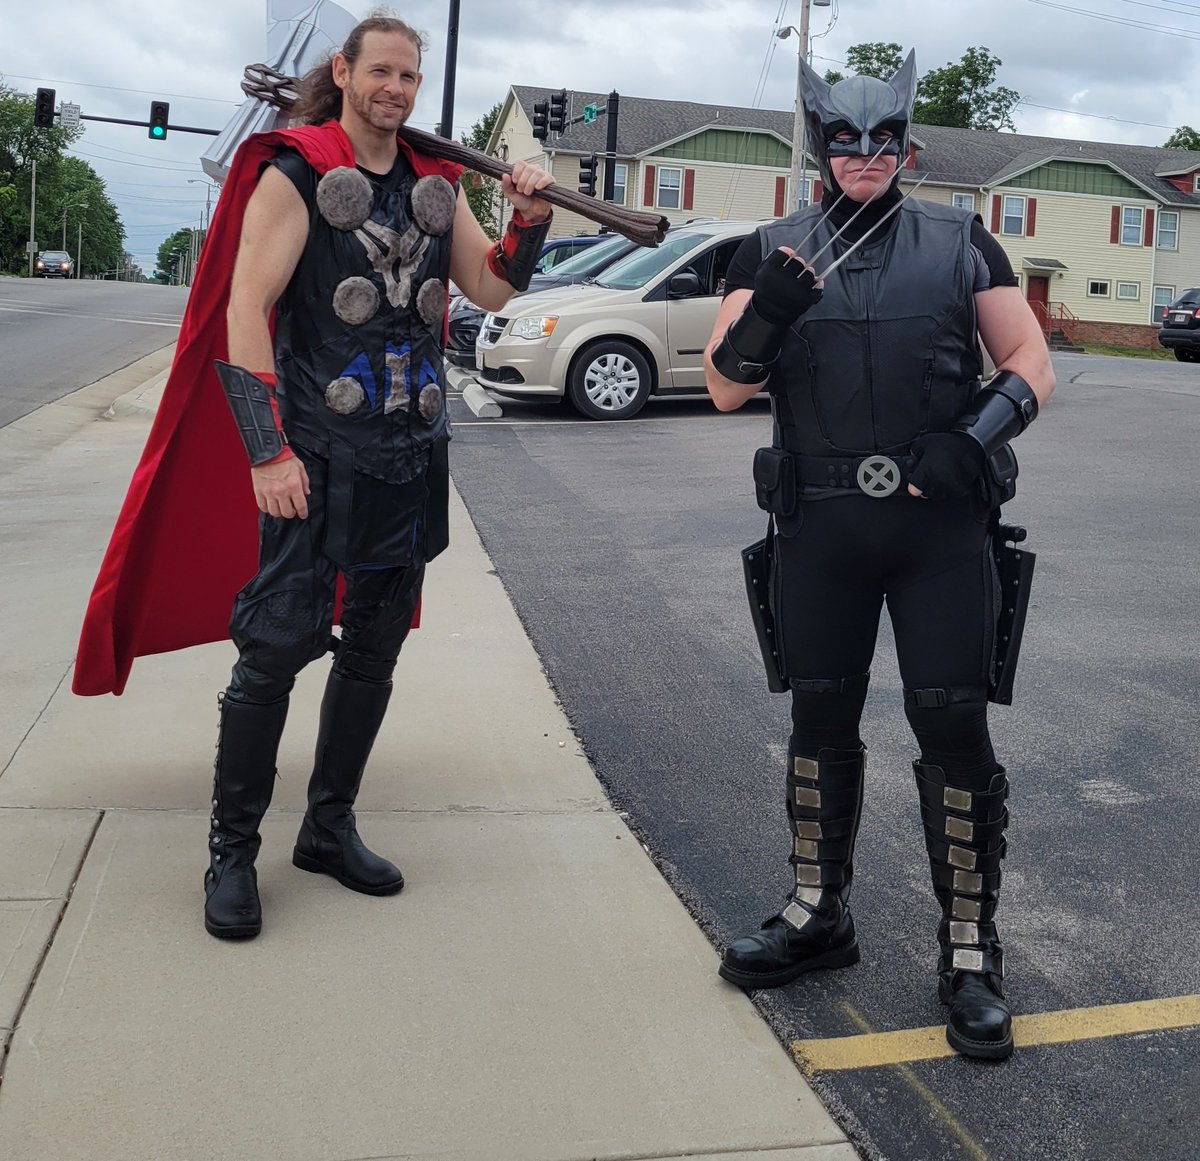 Thor and Wolverine say you should visit your @MothersBrewing